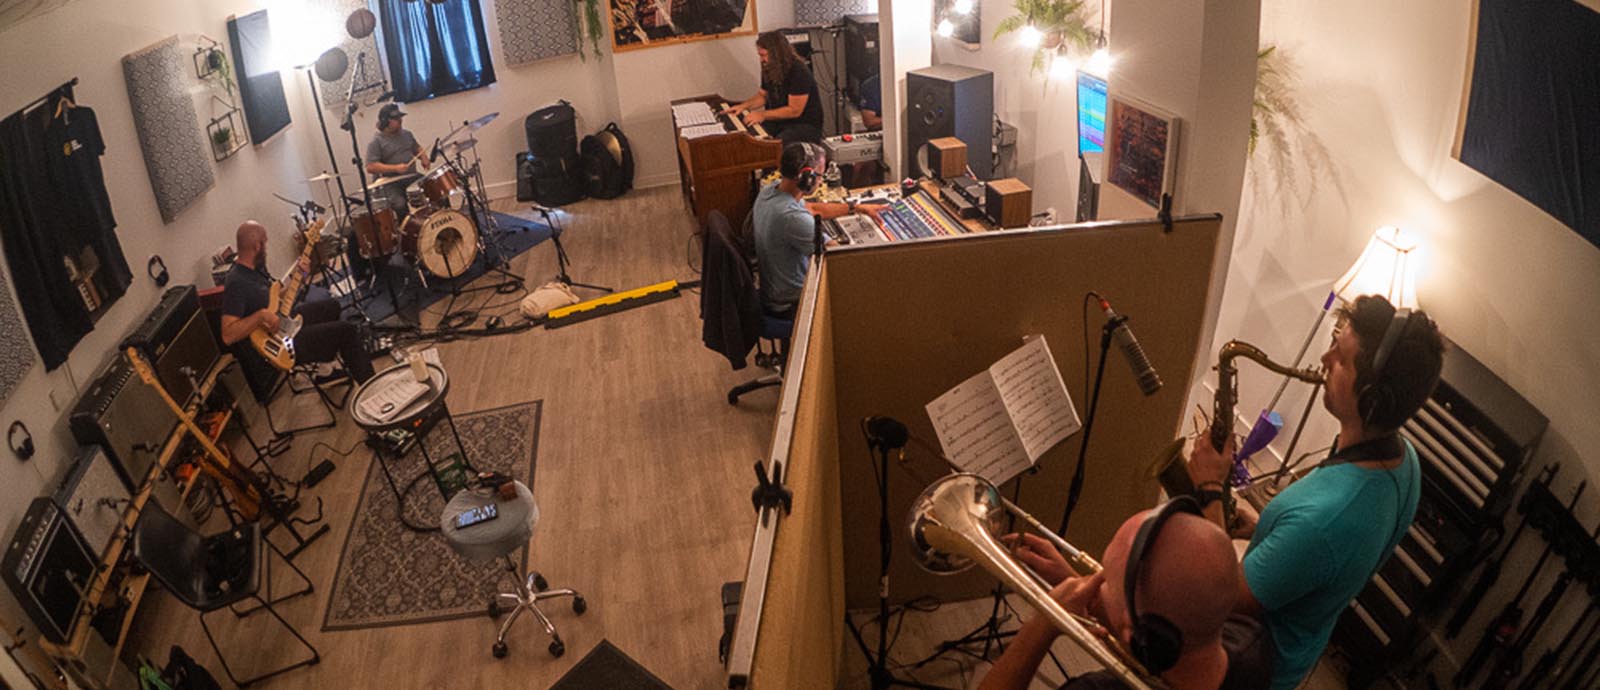 Mike and the musicians in the studio